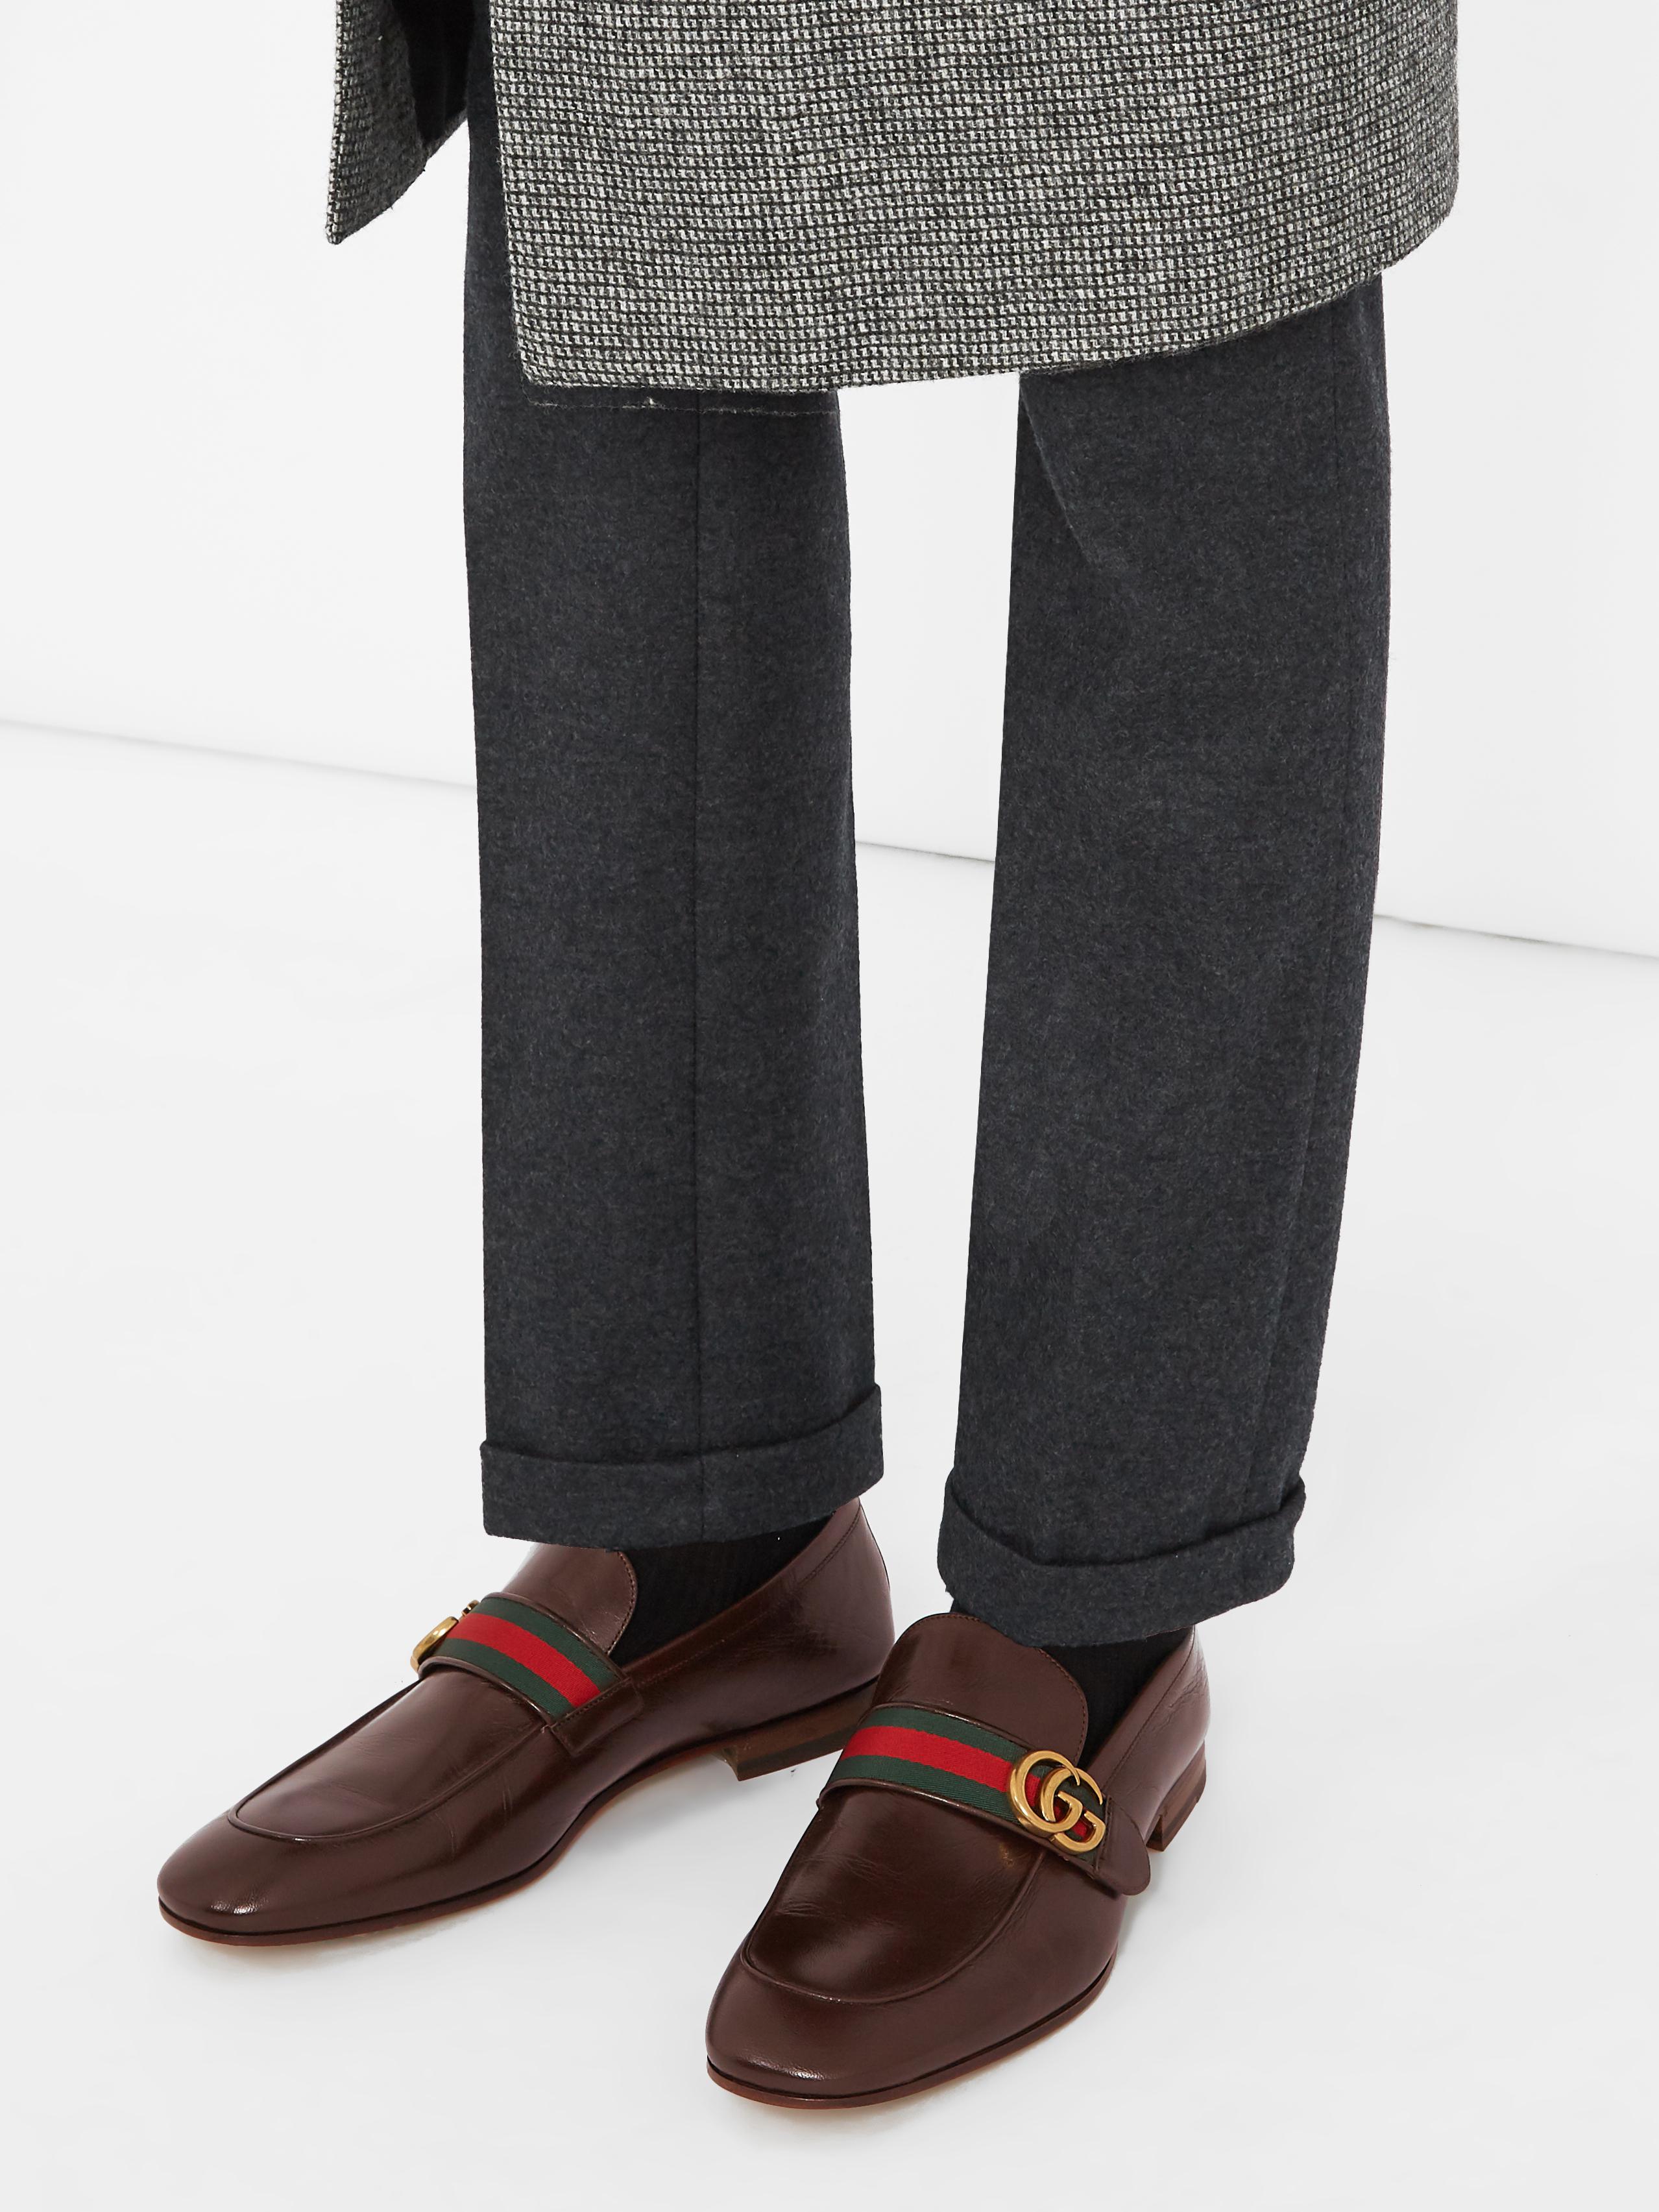 gucci donnie loafer, OFF 76%,www 